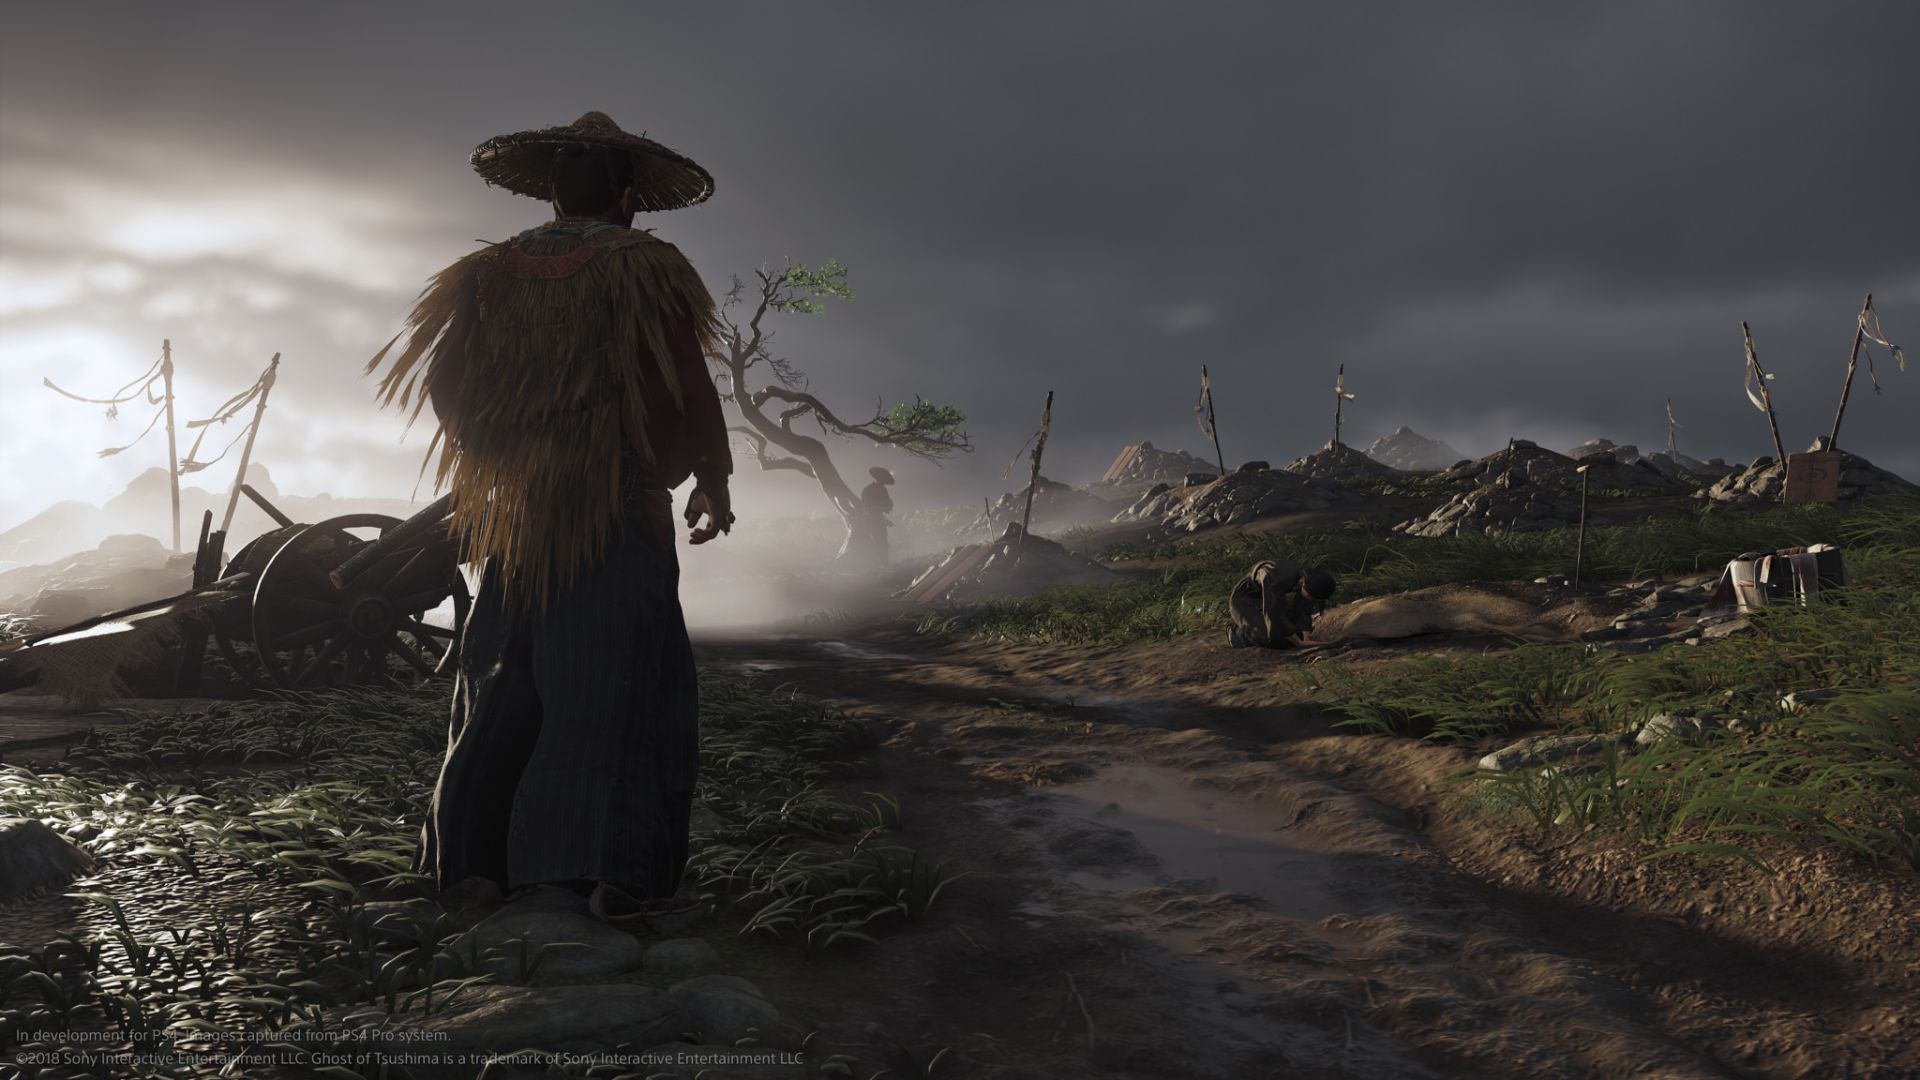 Sony E3 2018 Trailers for The Last of Us 2, Ghost of Tsushima, and More | Collider1920 x 1080